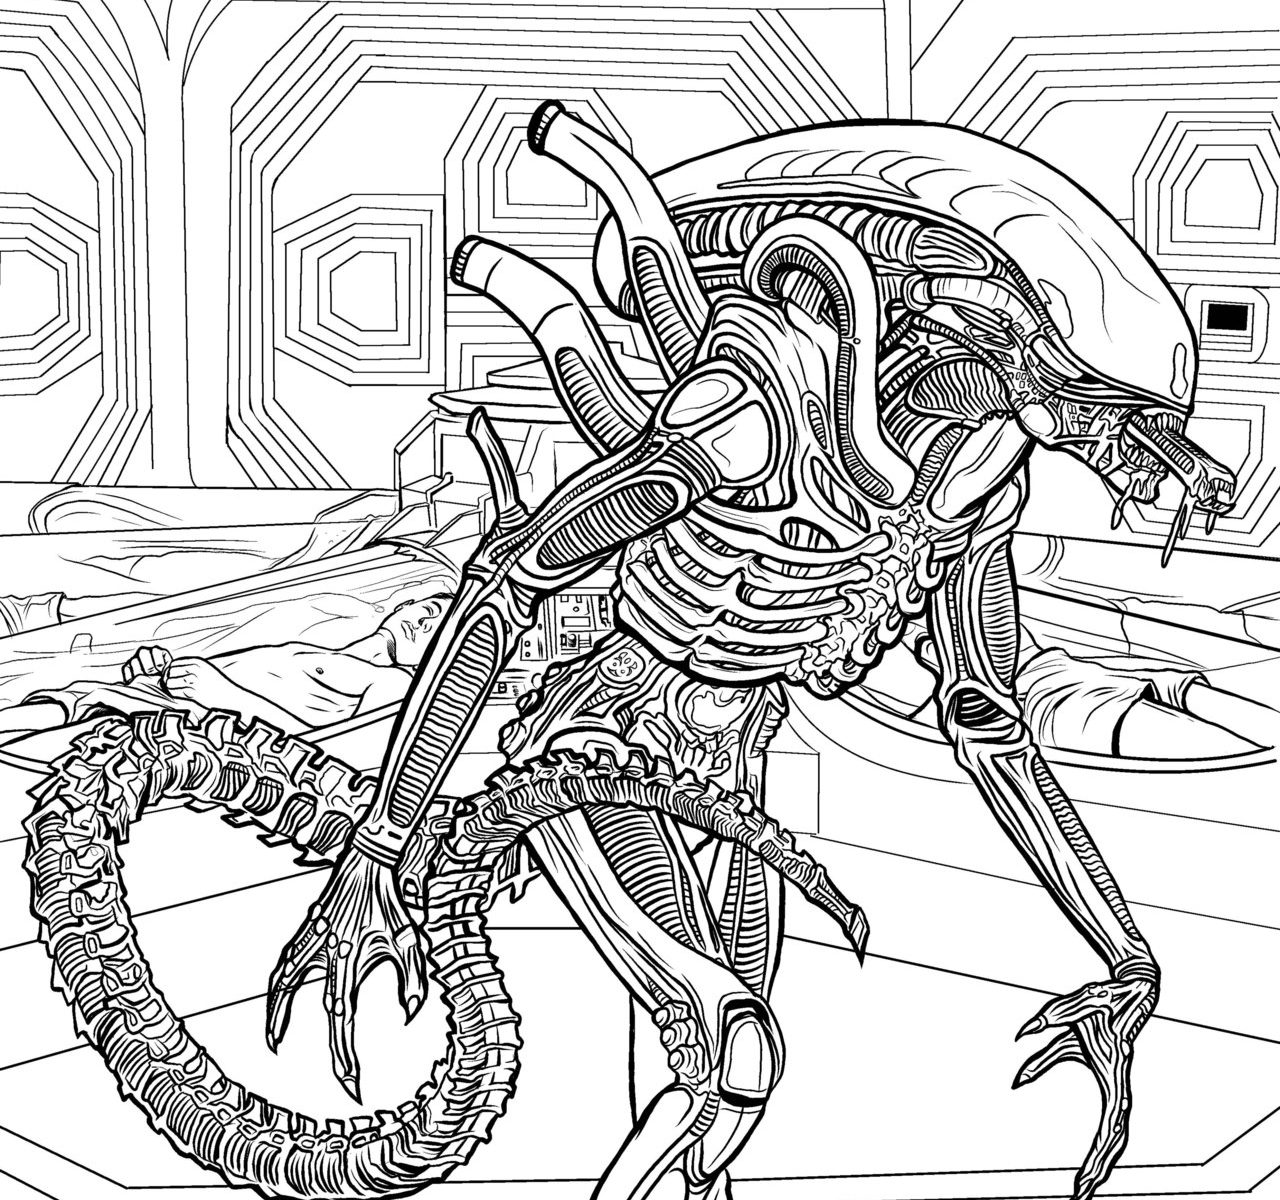 Xenomorph Coloring Pages at GetColoringscom Free